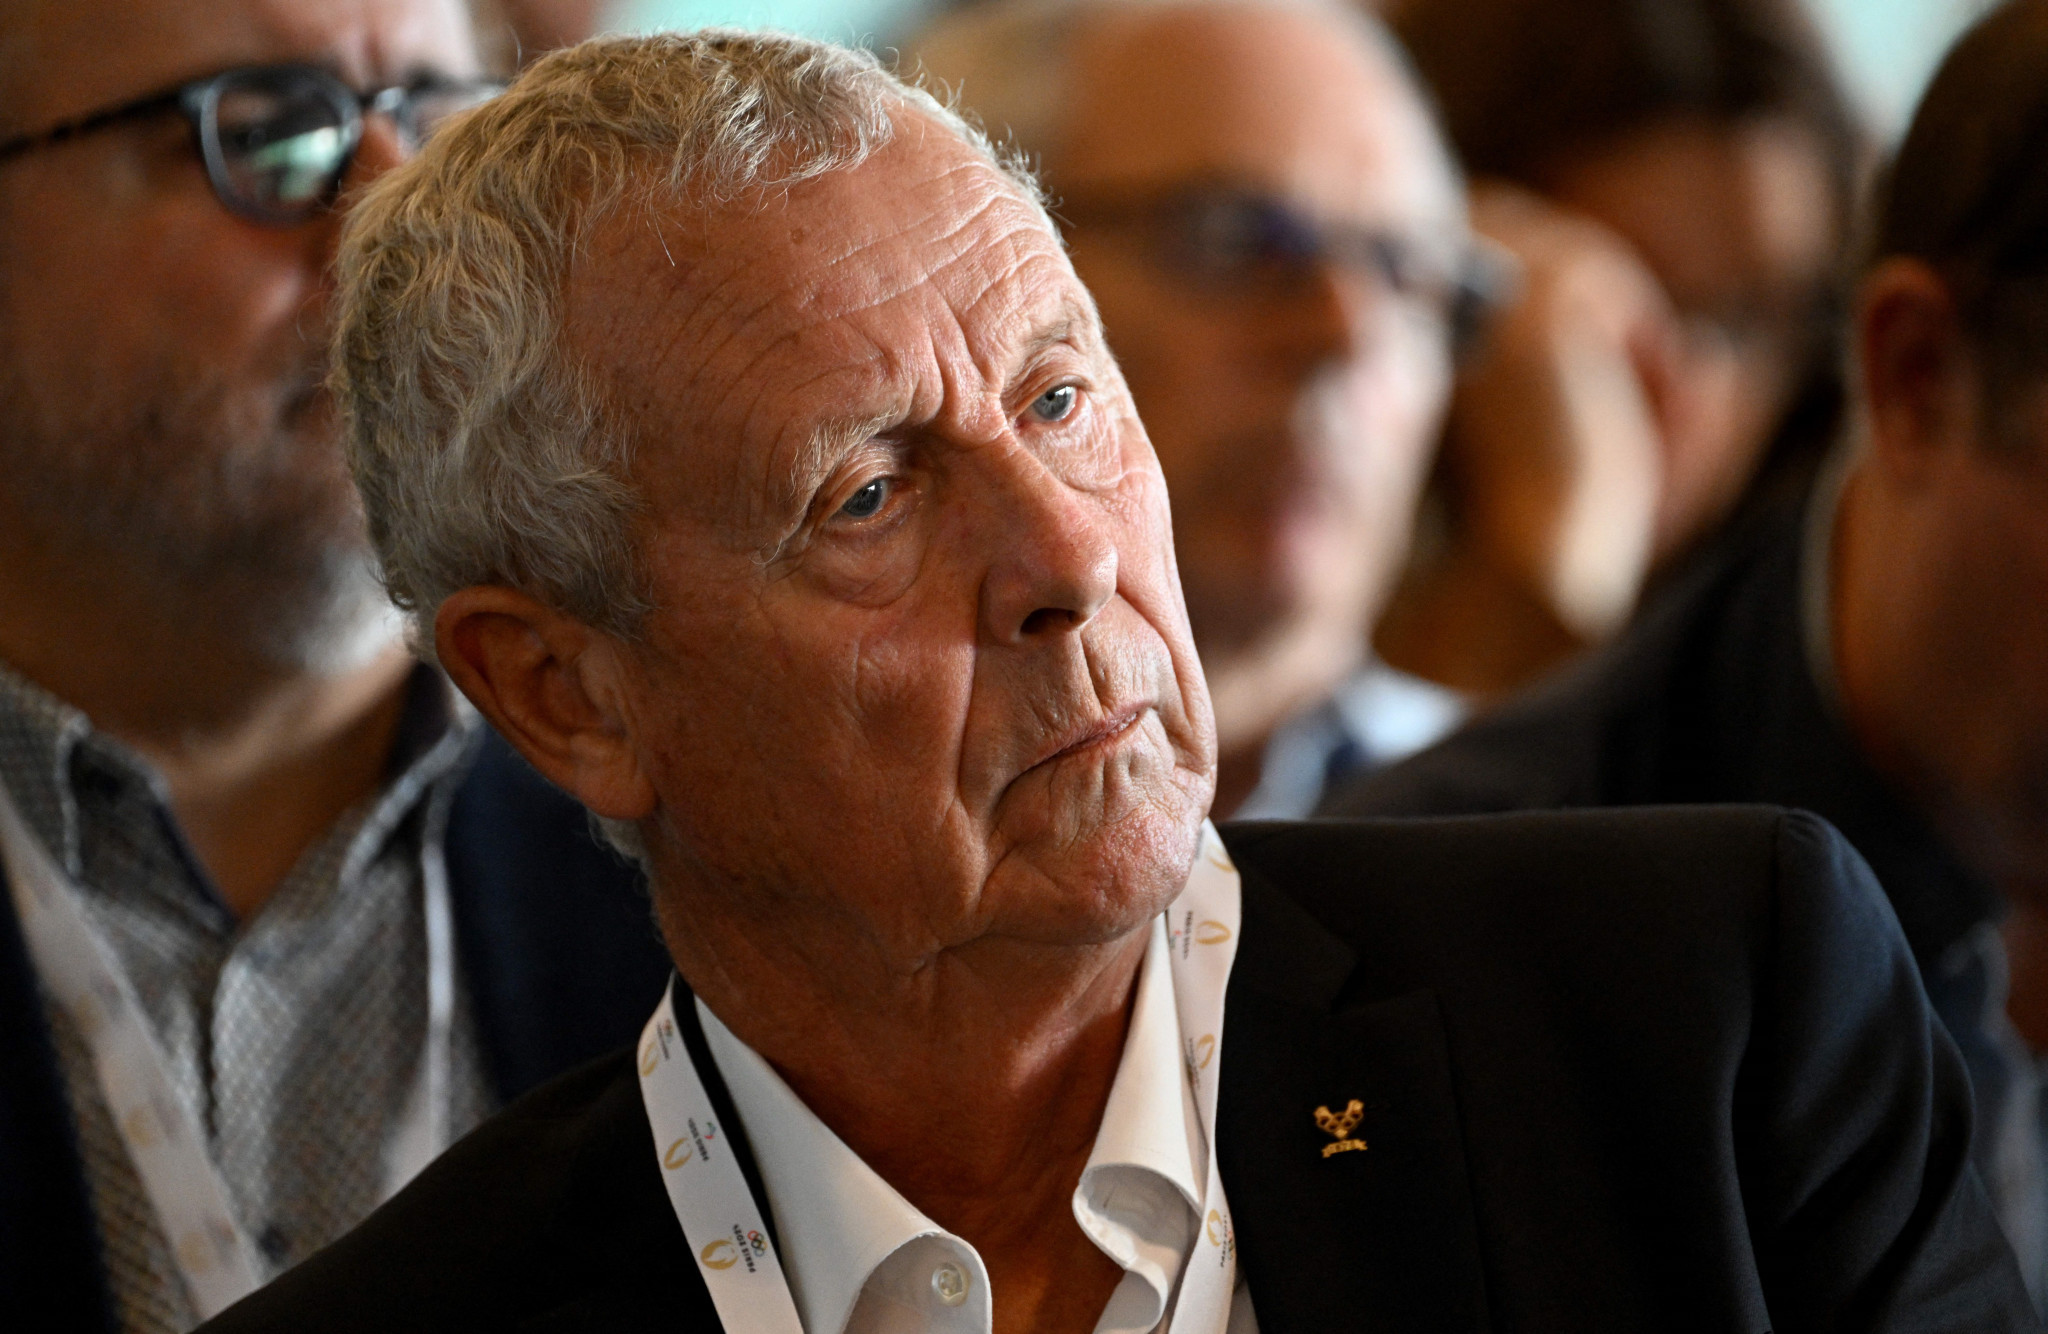 French IOC member Drut claims athletes should not be excluded because of actions of politicians 